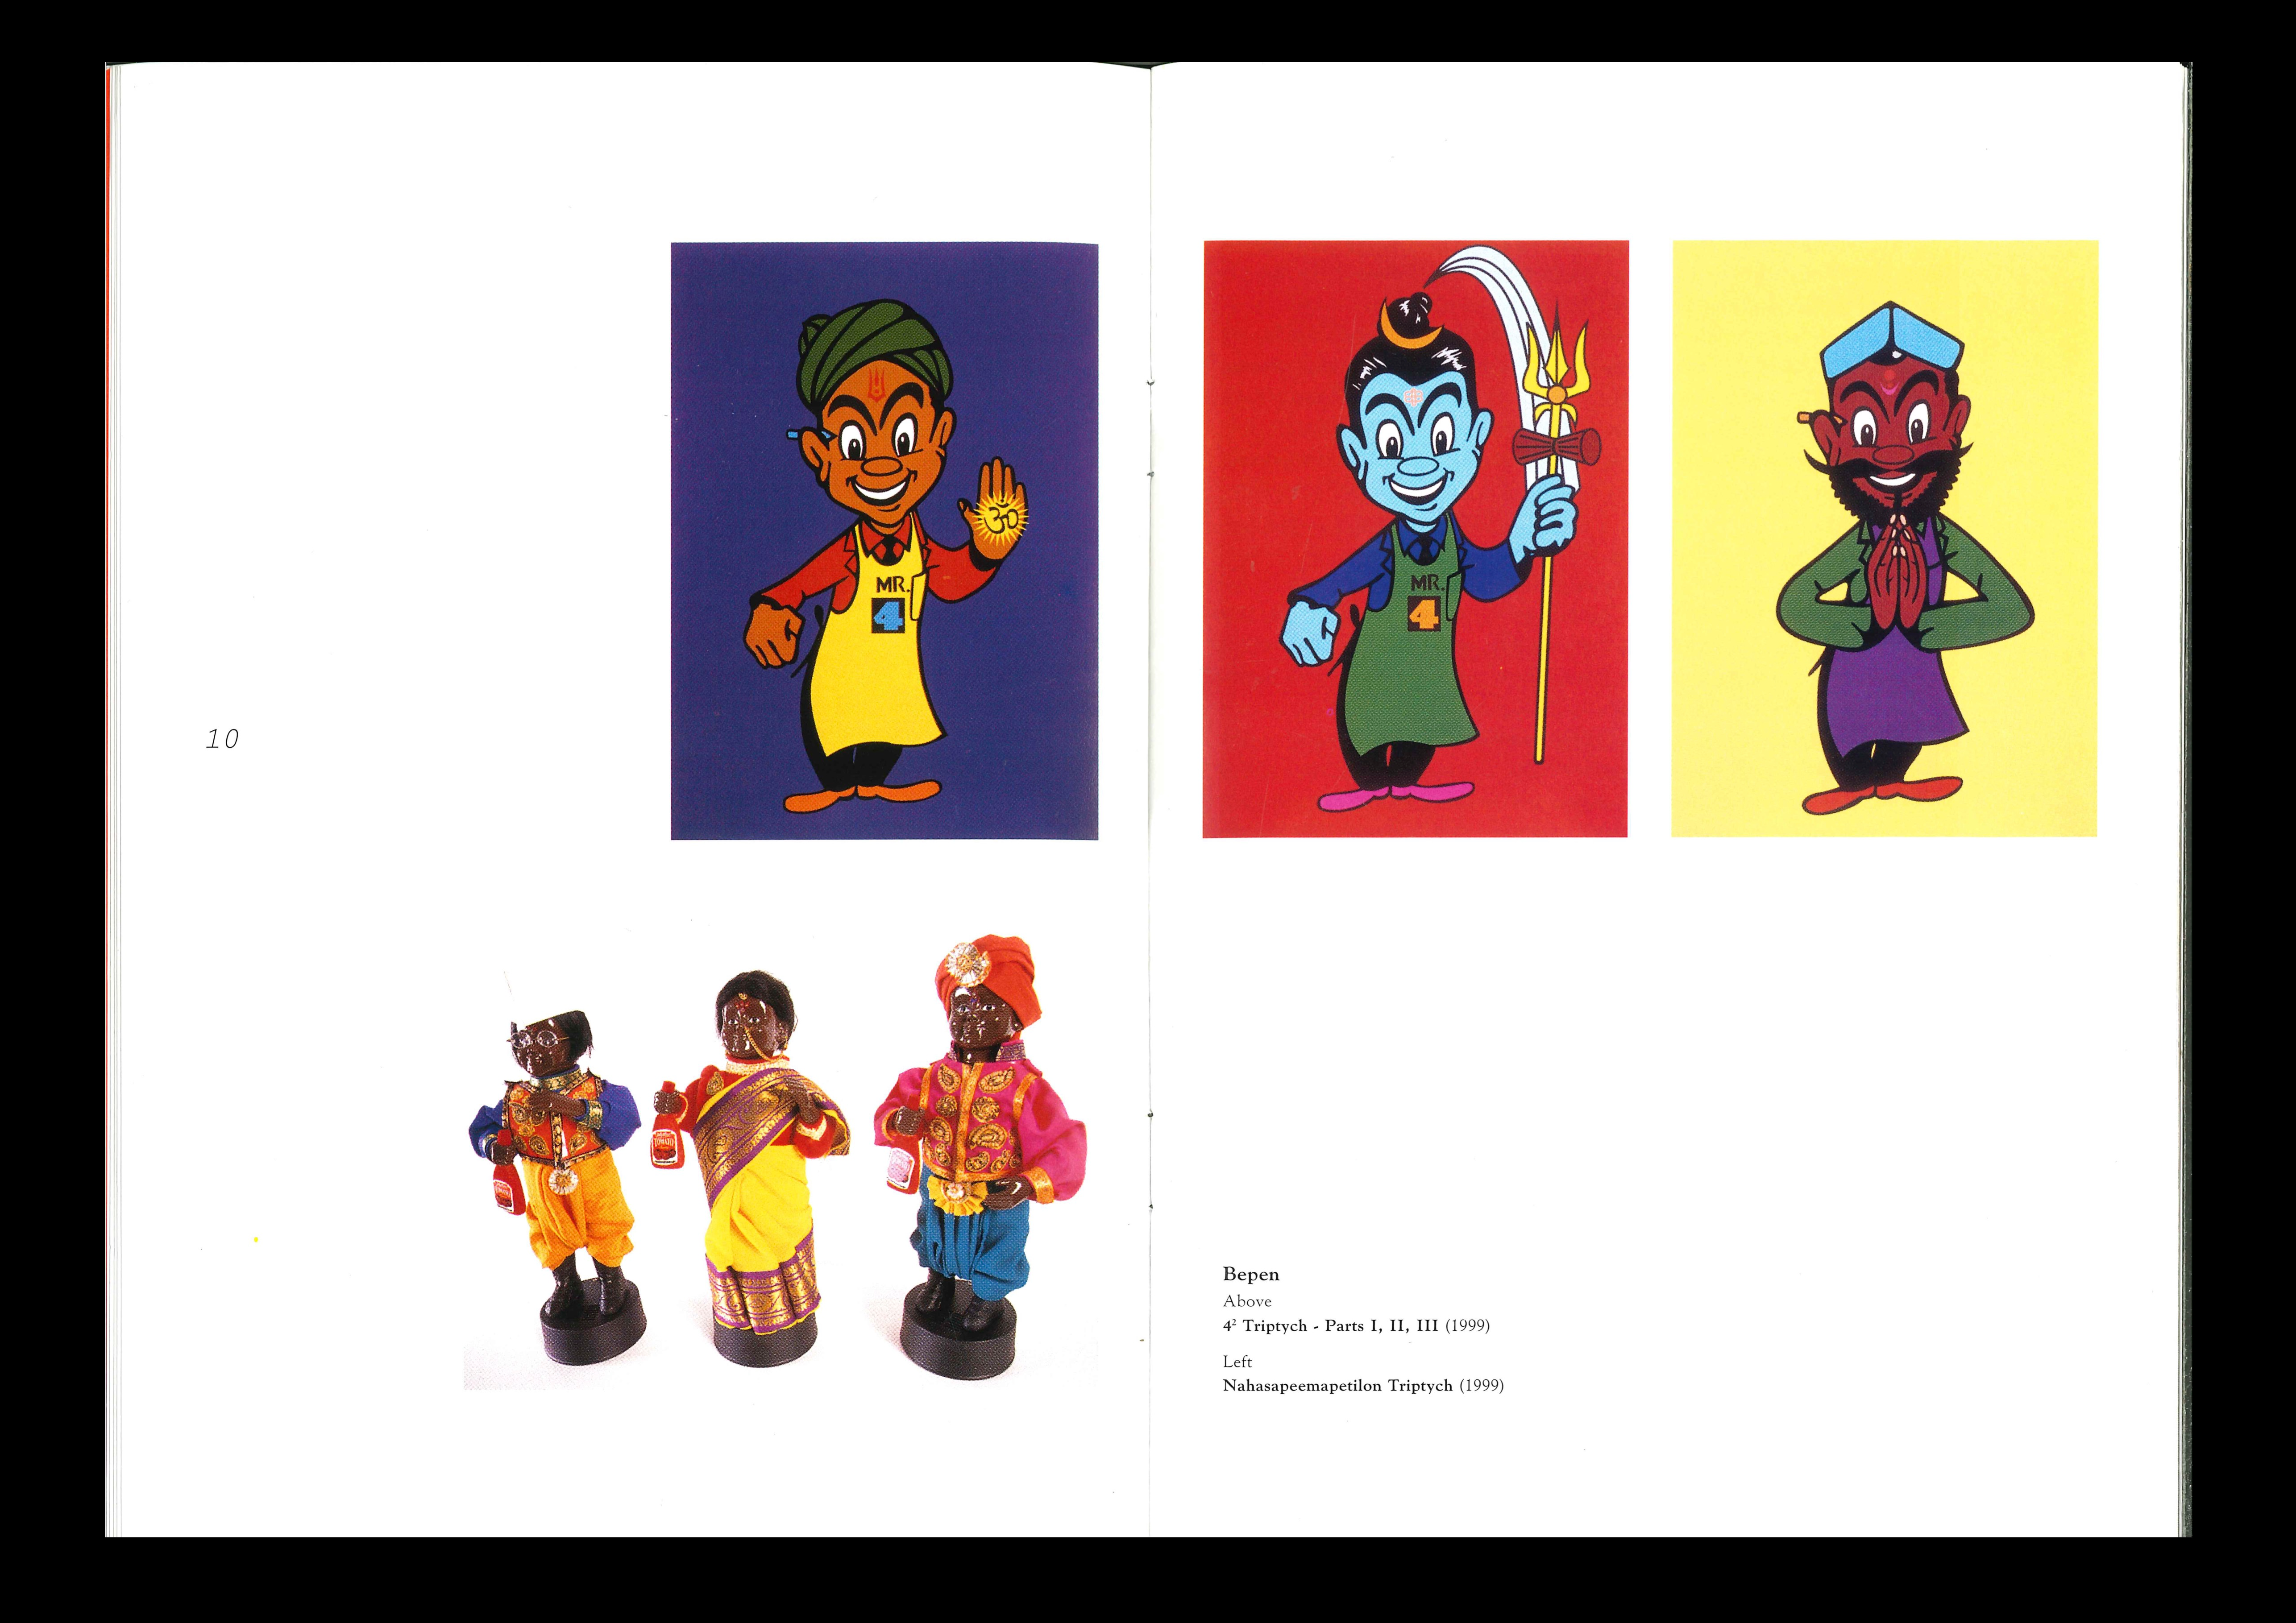 Colourful adaptions of the Four Square man with stereotypical Indian features added, alongside a set of three 'Indian' dolls.